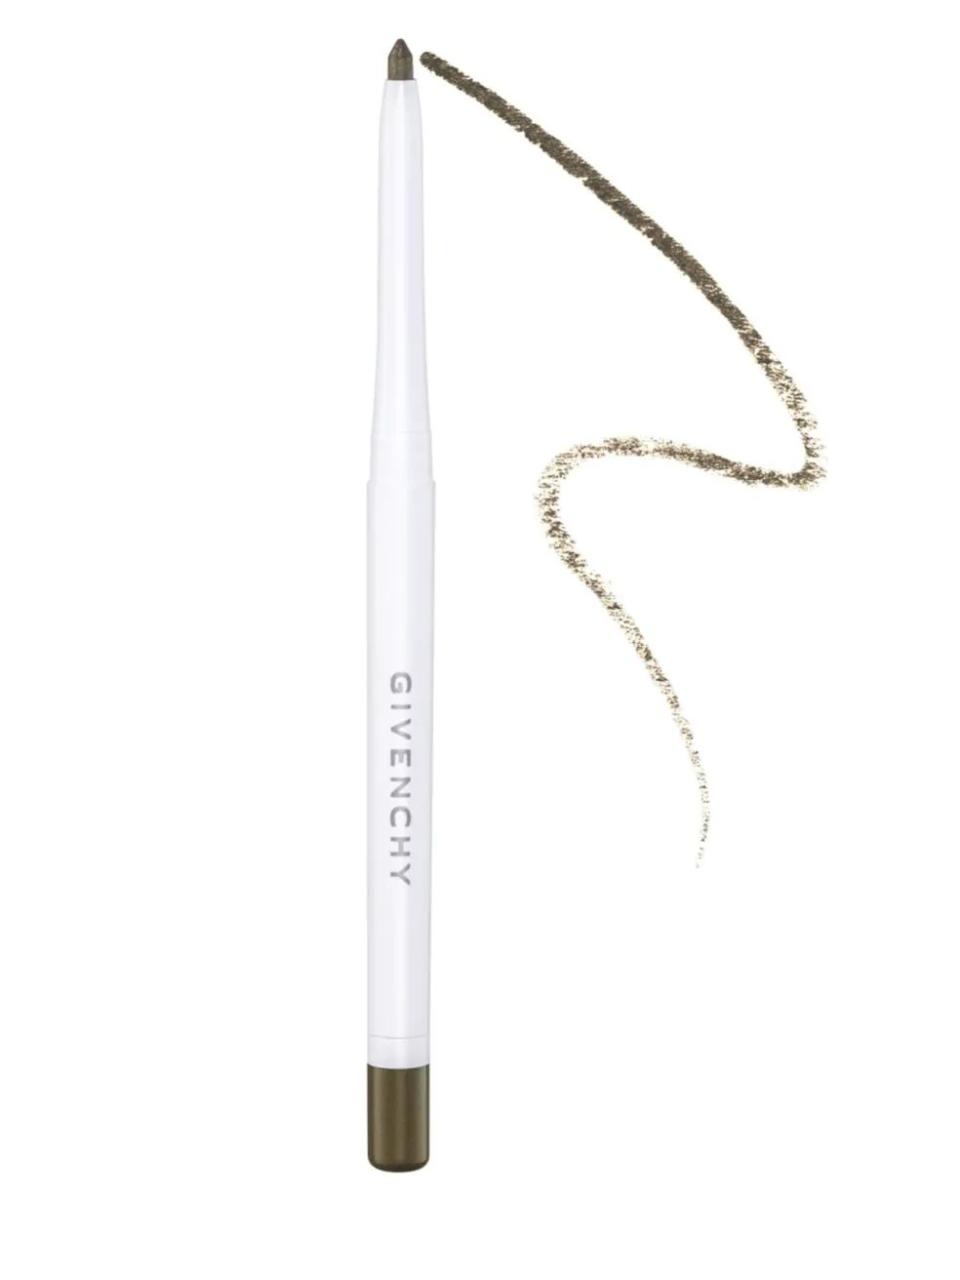 I used to never wear eyeliner on my top lid &mdash; I have hooded eyes and I always felt like having too much going on up there made them look smaller. But for some reason this liner in this shade feels flattering and looks super sexy. Plus it's easy to apply and looks even better when it's a little smudged. It's basically foolproof. - Jamie &lt;br&gt;&lt;br&gt;<strong><a href="https://www.saksfifthavenue.com/givenchy-kohl-eyeliner-pencil/product/0400097260301?site_refer=CSE_GGLPLA:Womens_Beauty:Givenchy&amp;CSE_CID=G_Saks_PLA_US_Beauty:Make+Up&amp;gclid=EAIaIQobChMIyainrOiK5gIViZWzCh2IGAR9EAQYASABEgIVwfD_BwE&amp;gclsrc=aw.ds" target="_blank" rel="noopener noreferrer">Get the Givenchy Kohl Eyeliner Pencil in African Bronze from Saks Fifth Avenue for $27.﻿</a></strong>